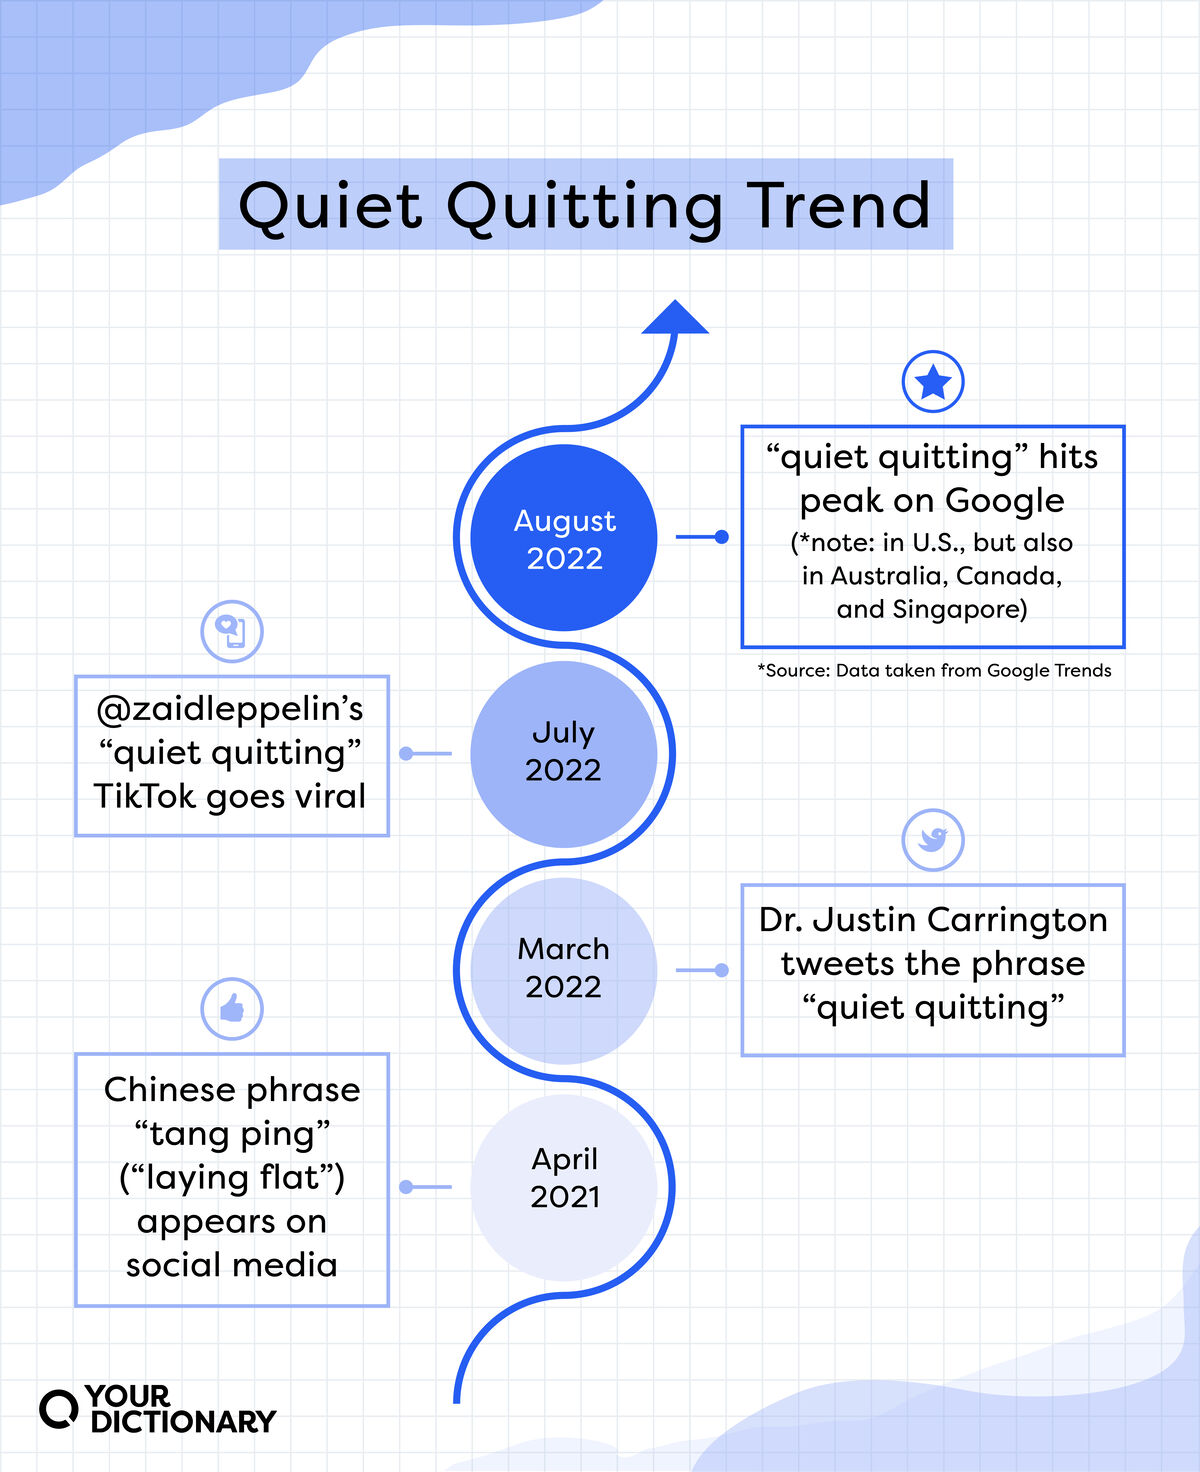 Timeline of events outlined in article that led to the phrase "quiet quitting"